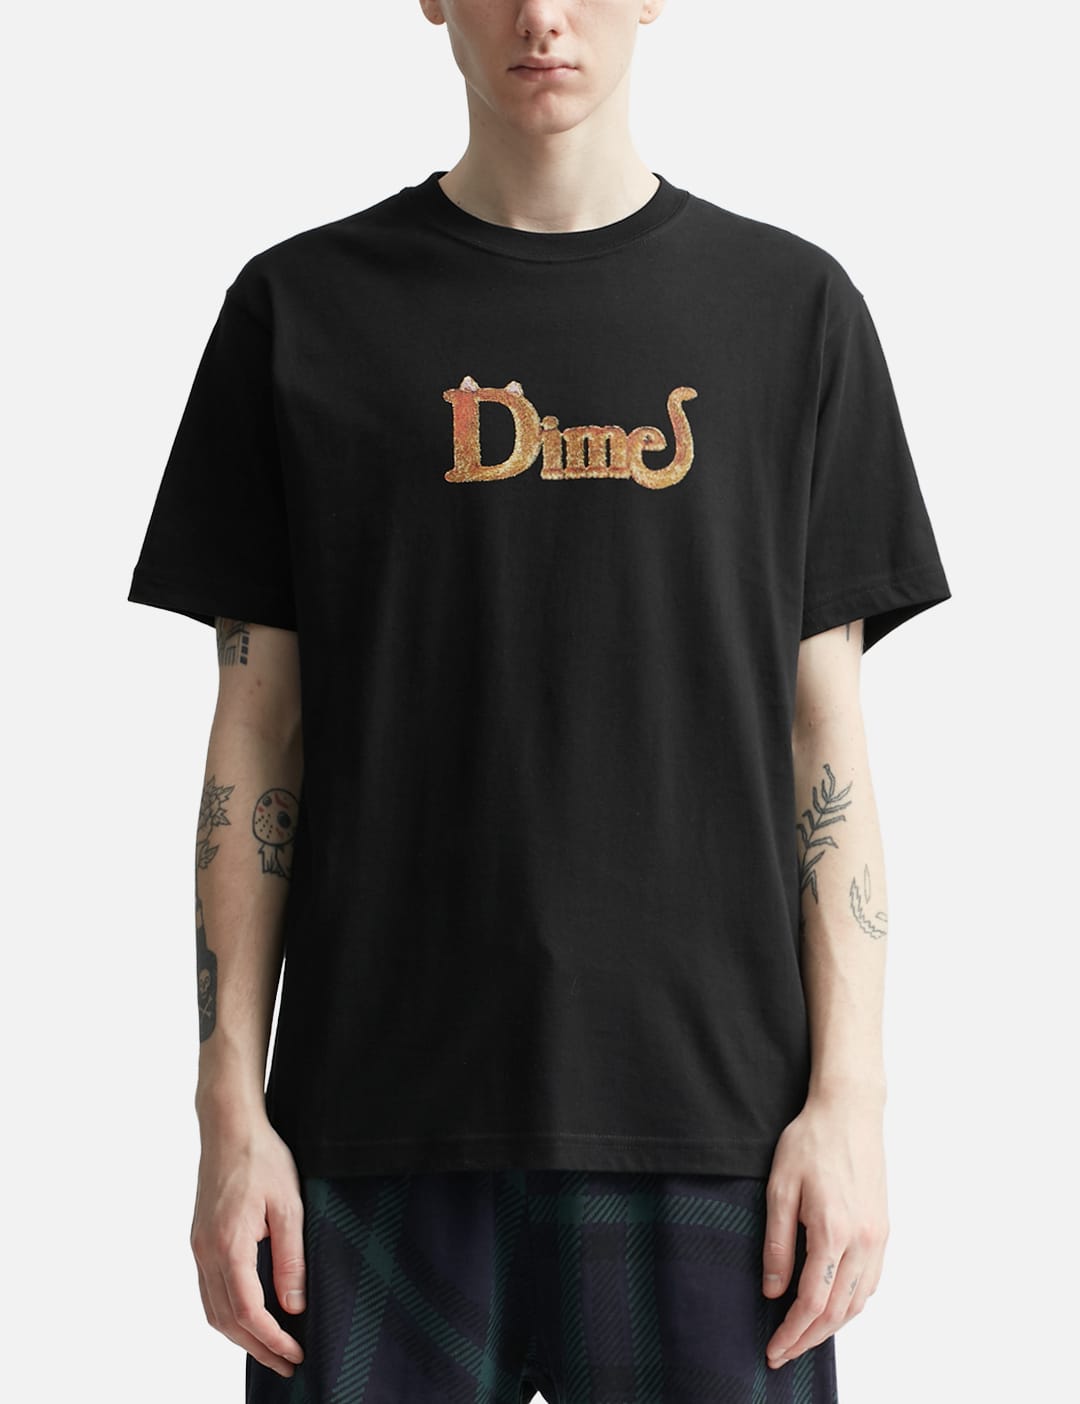 Dime - Classic Cat T-shirt | HBX - Globally Curated Fashion and ...